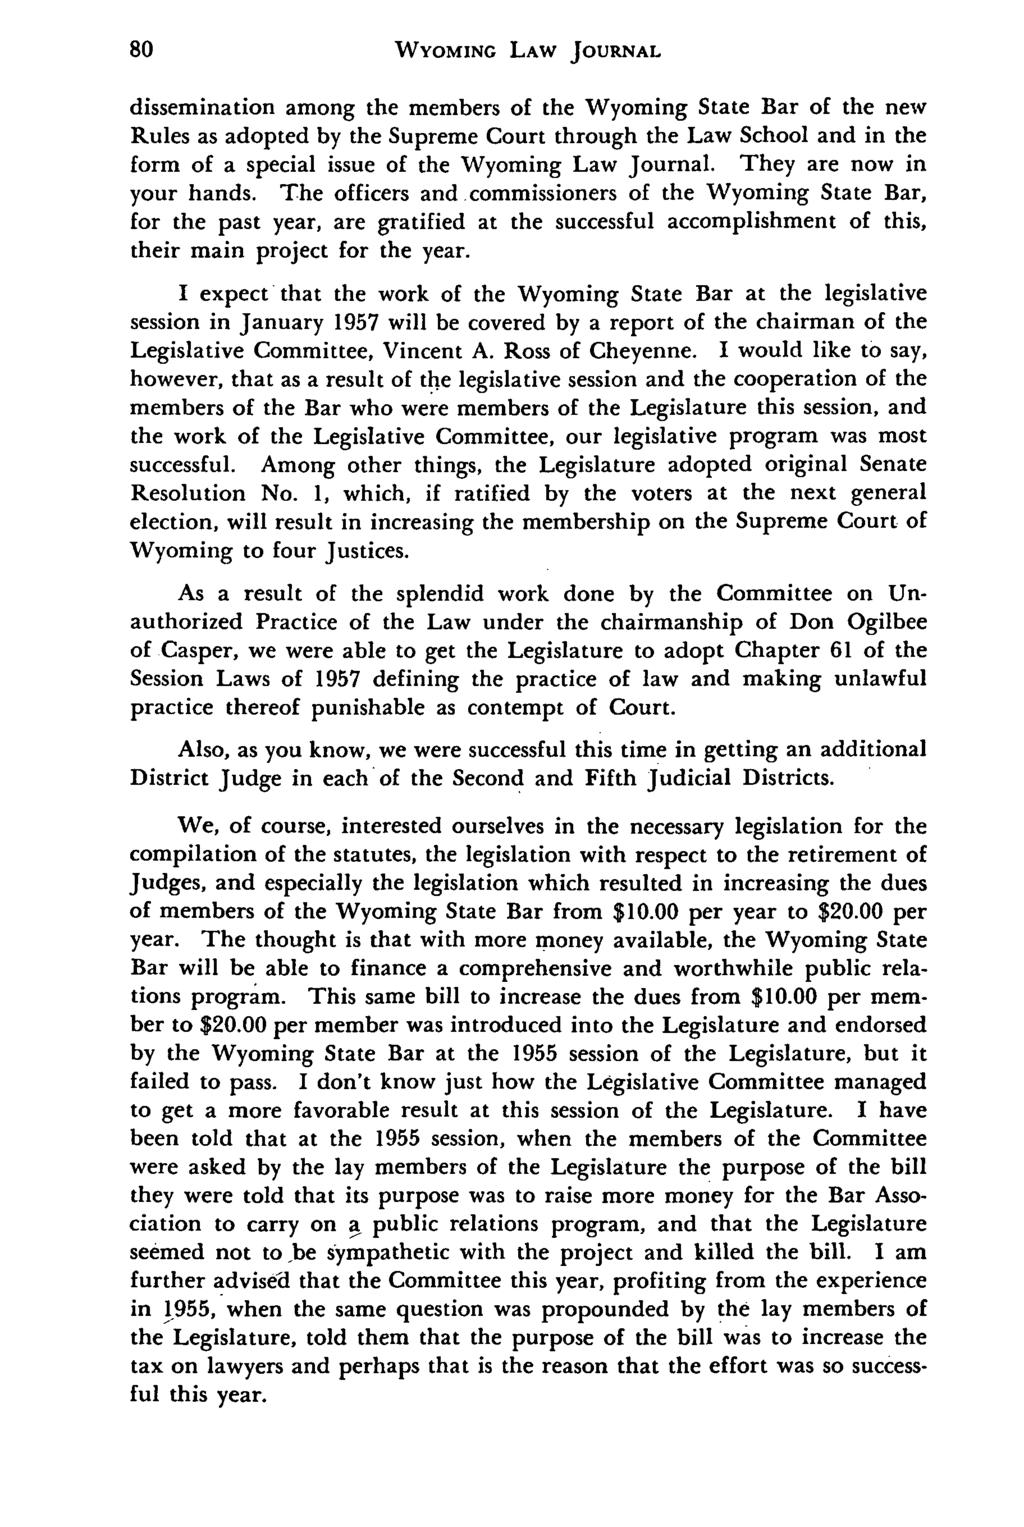 WYOMING LAW JOURNAL dissemination among the members of the Wyoming State Bar of the new Rules as adopted by the Supreme Court through the Law School and in the form of a special issue of the Wyoming